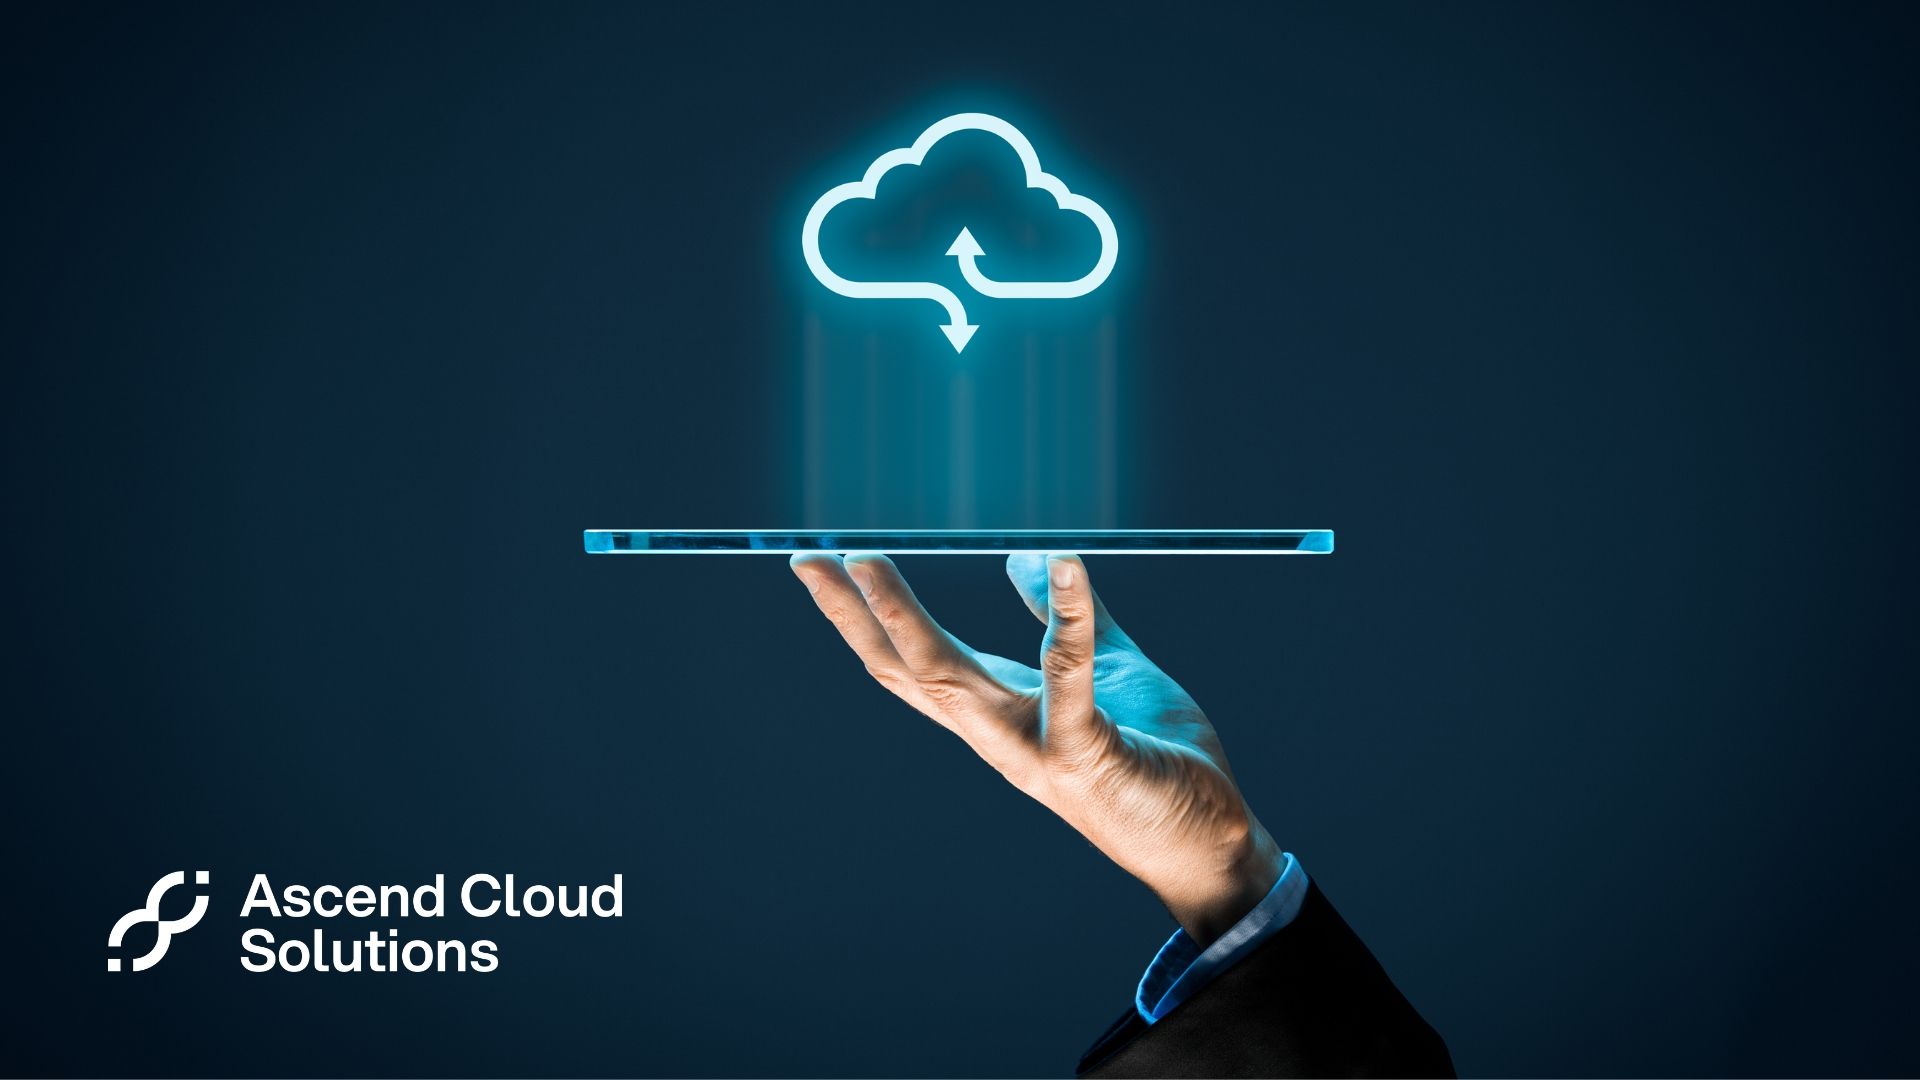 Cloud migration describes the process of moving some or all of the organization’s business 